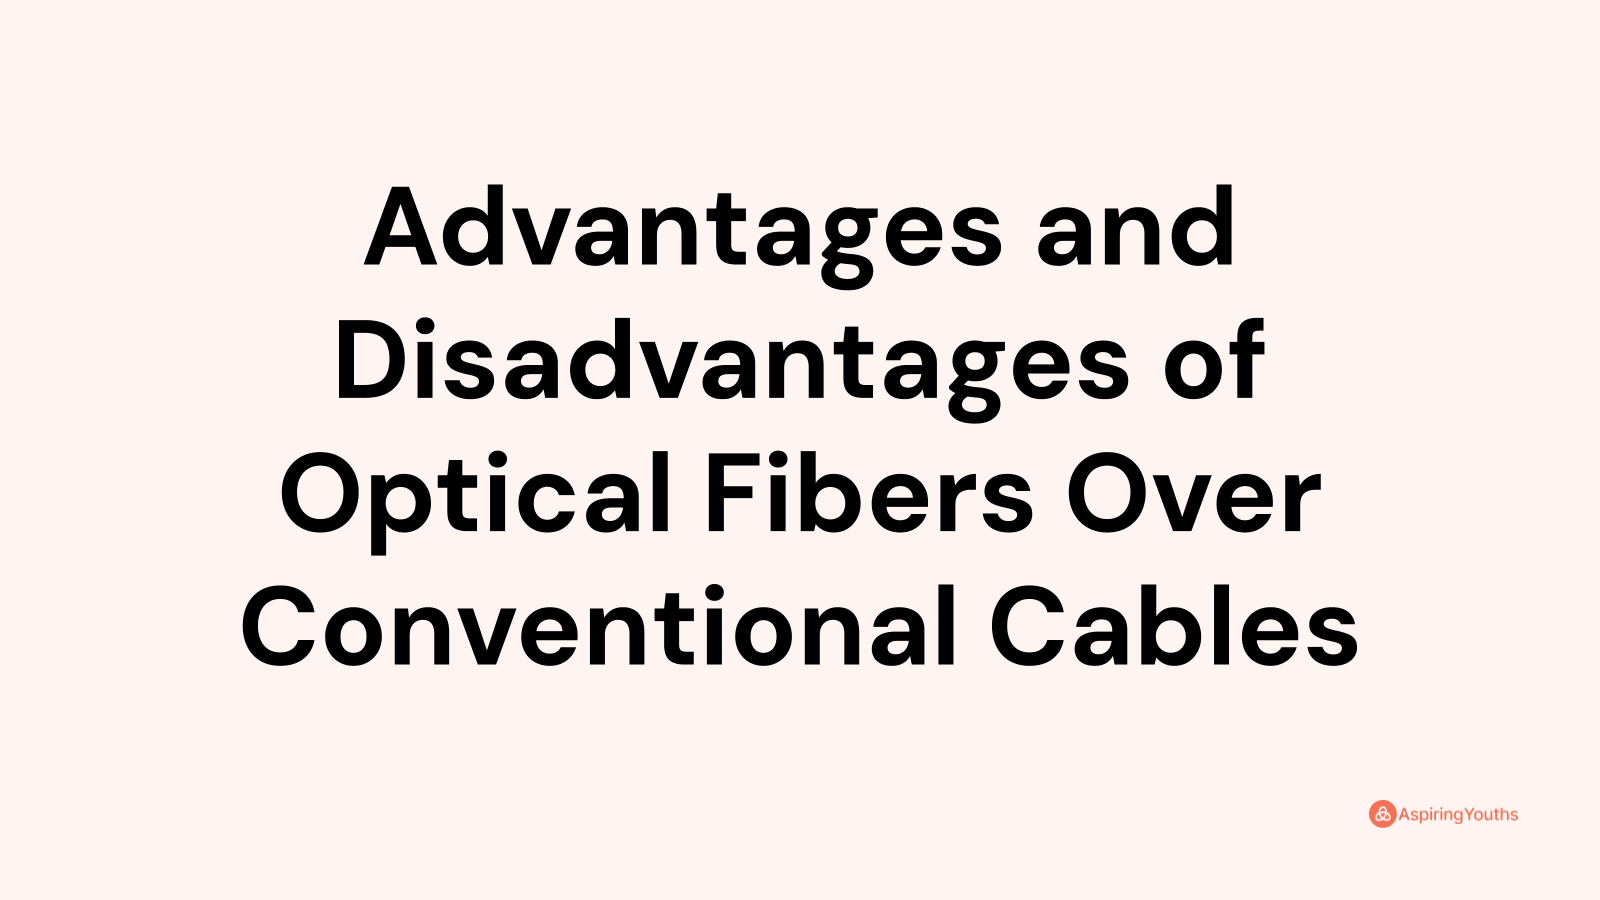 Advantages and disadvantages of Optical Fibers Over Conventional Cables